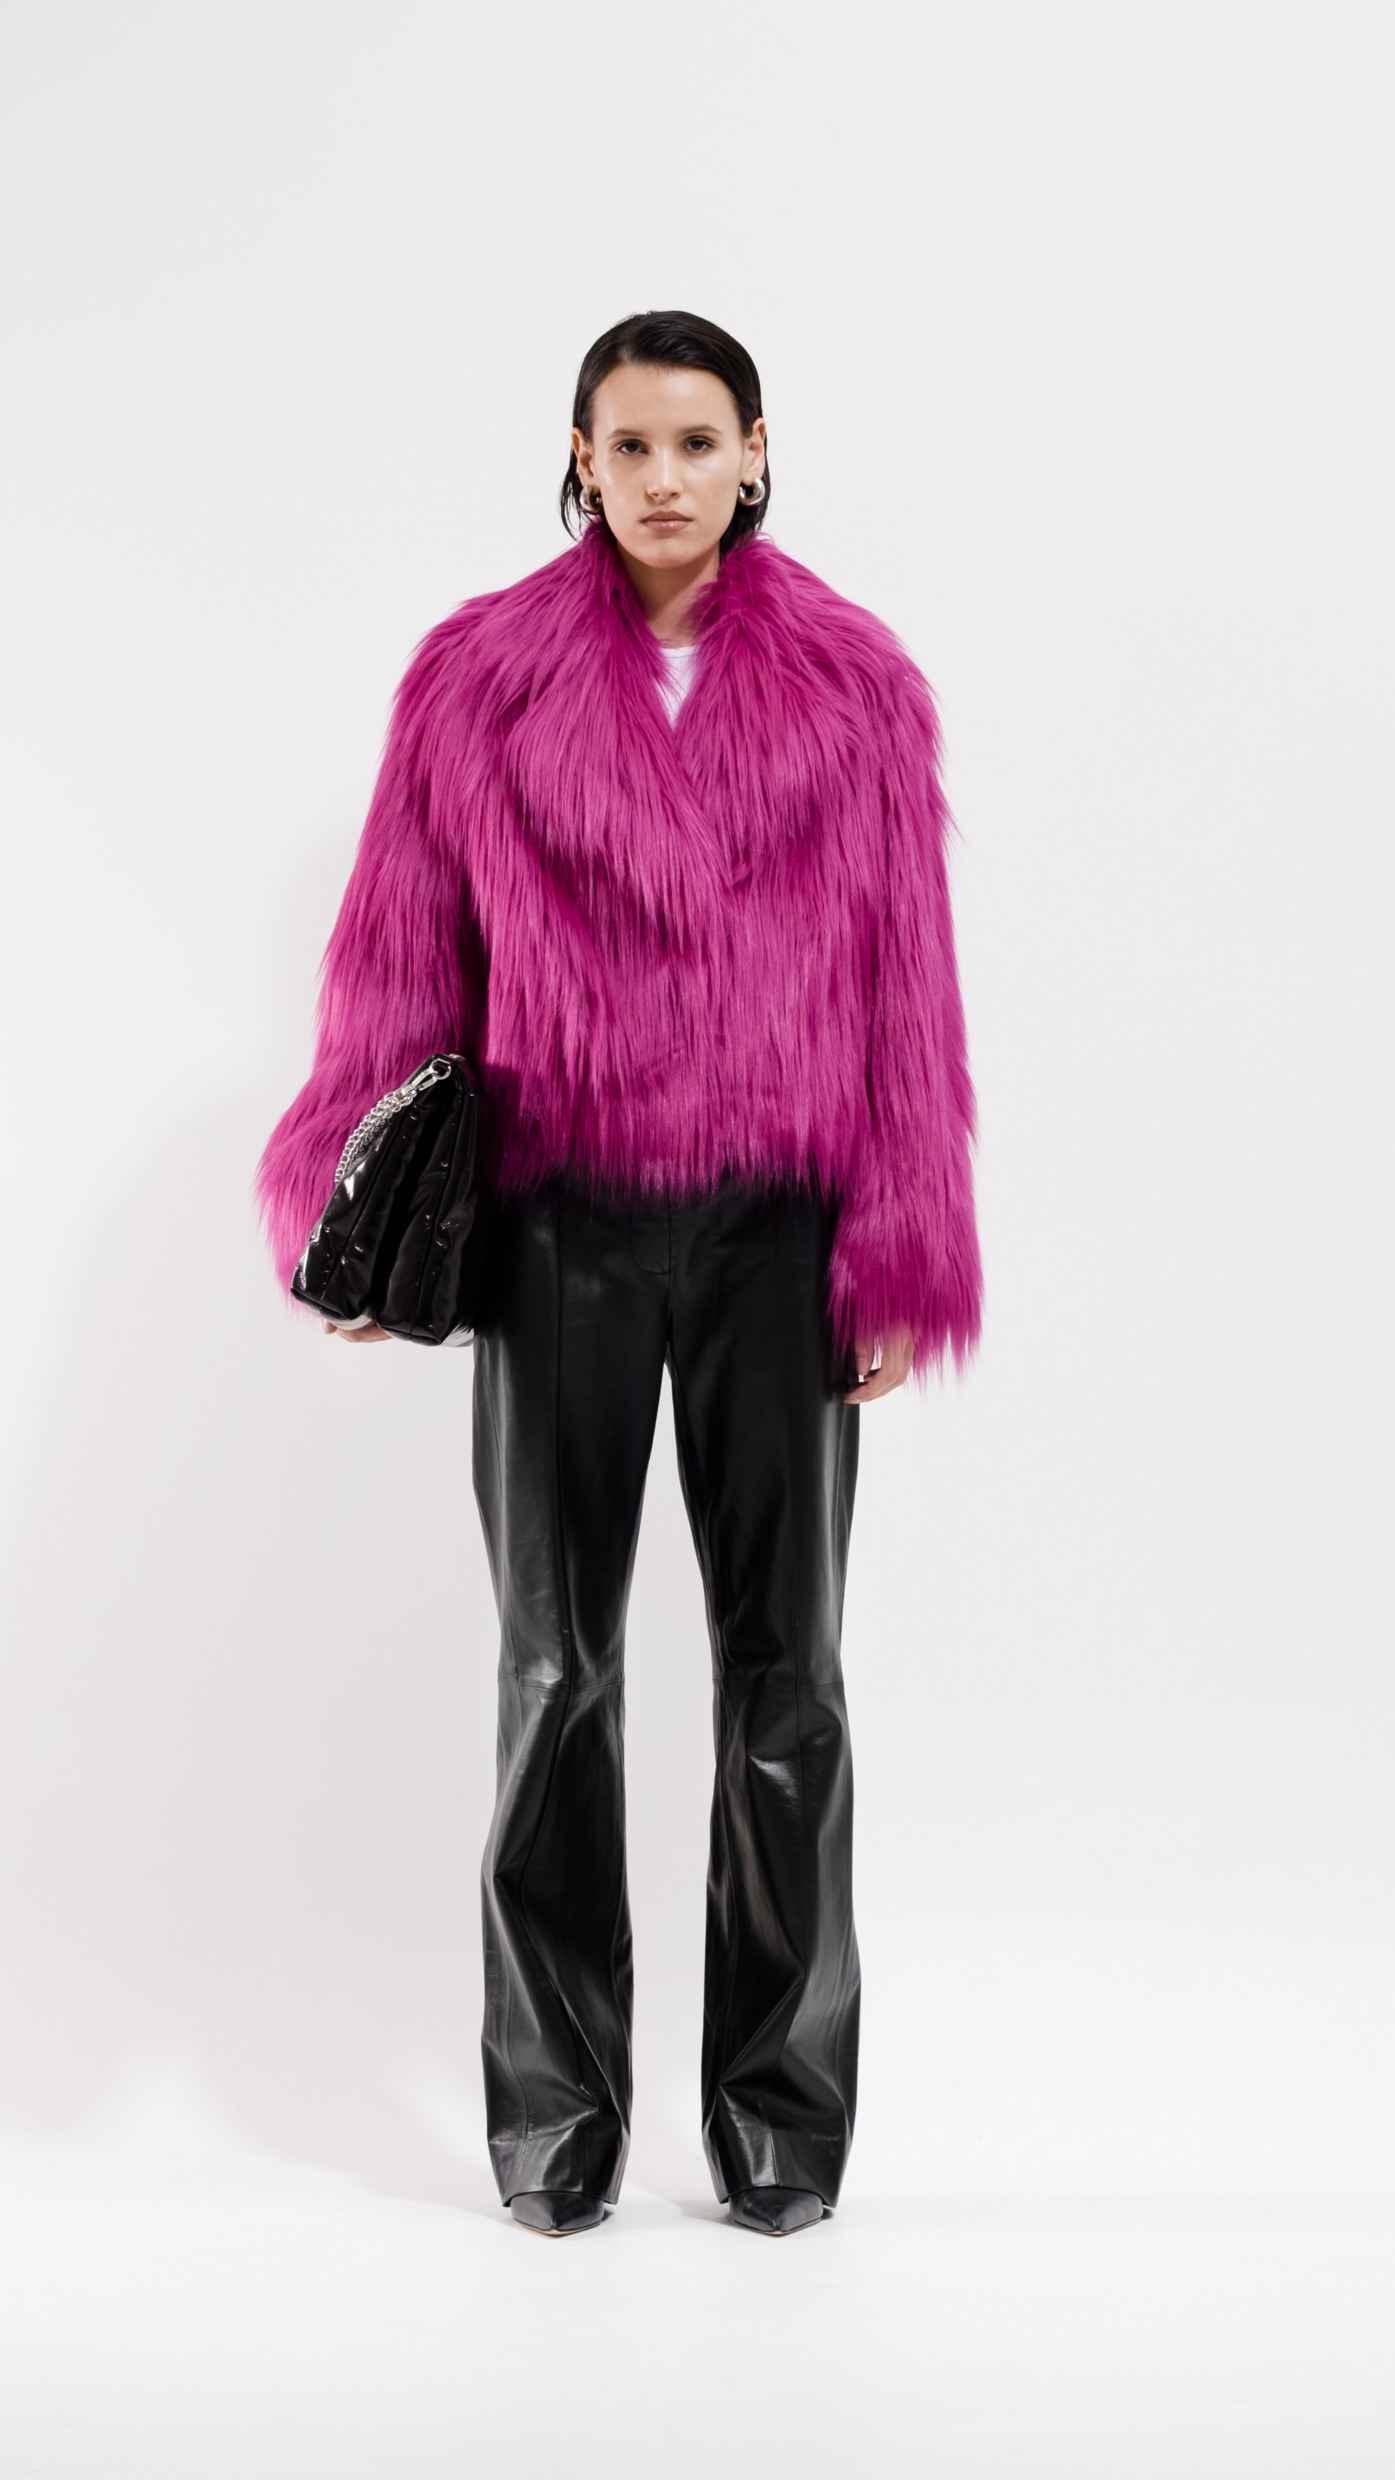 A woman in black vegan leather pants and a pink faux fur jacket.